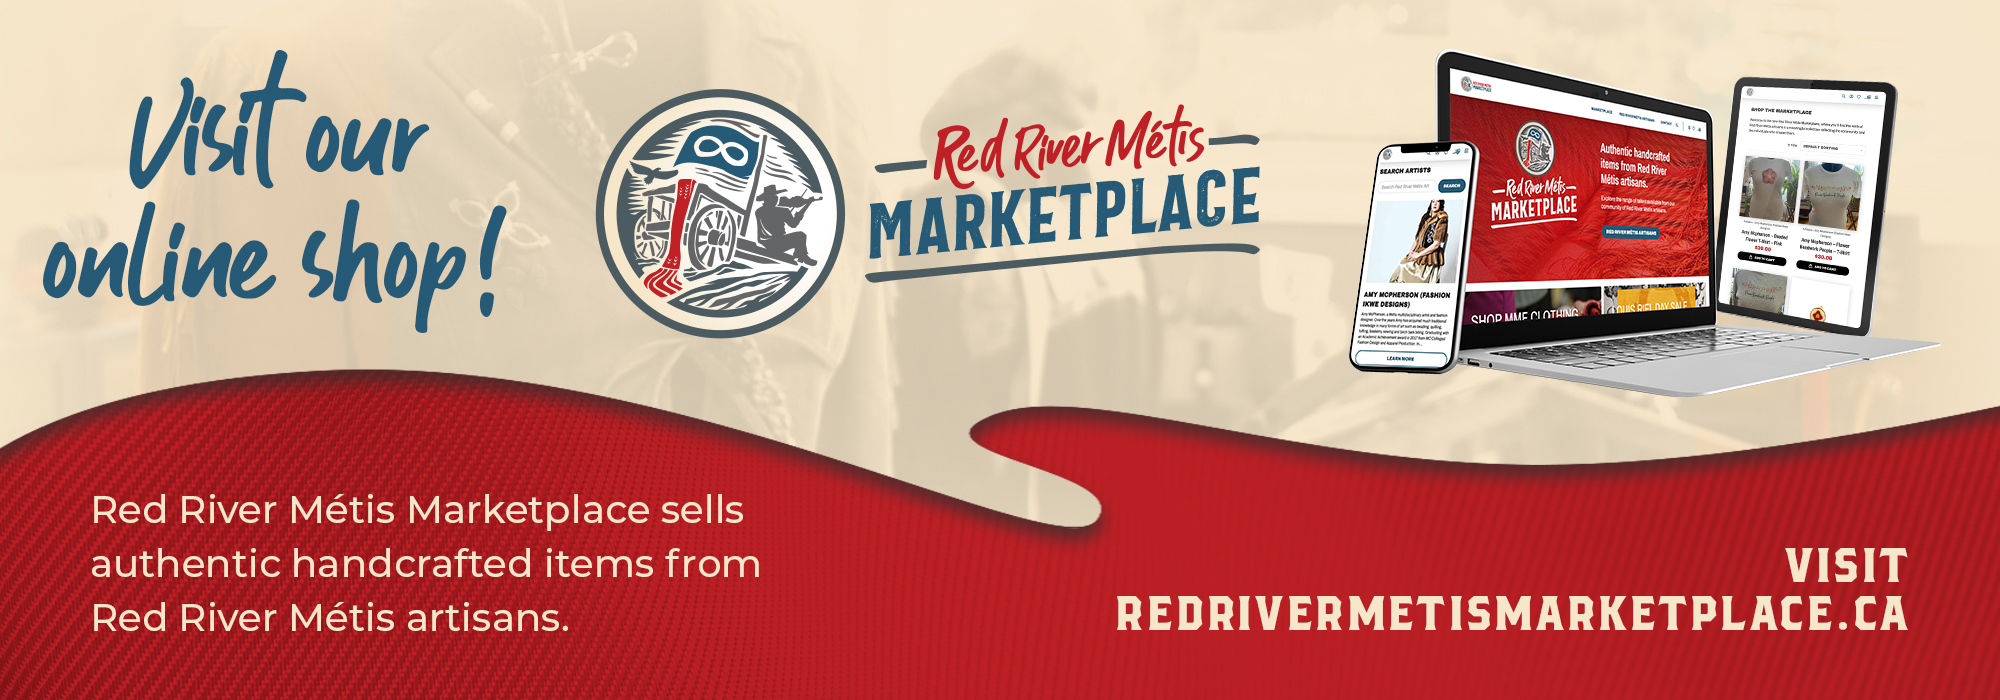 Red River Mtis Marketplace